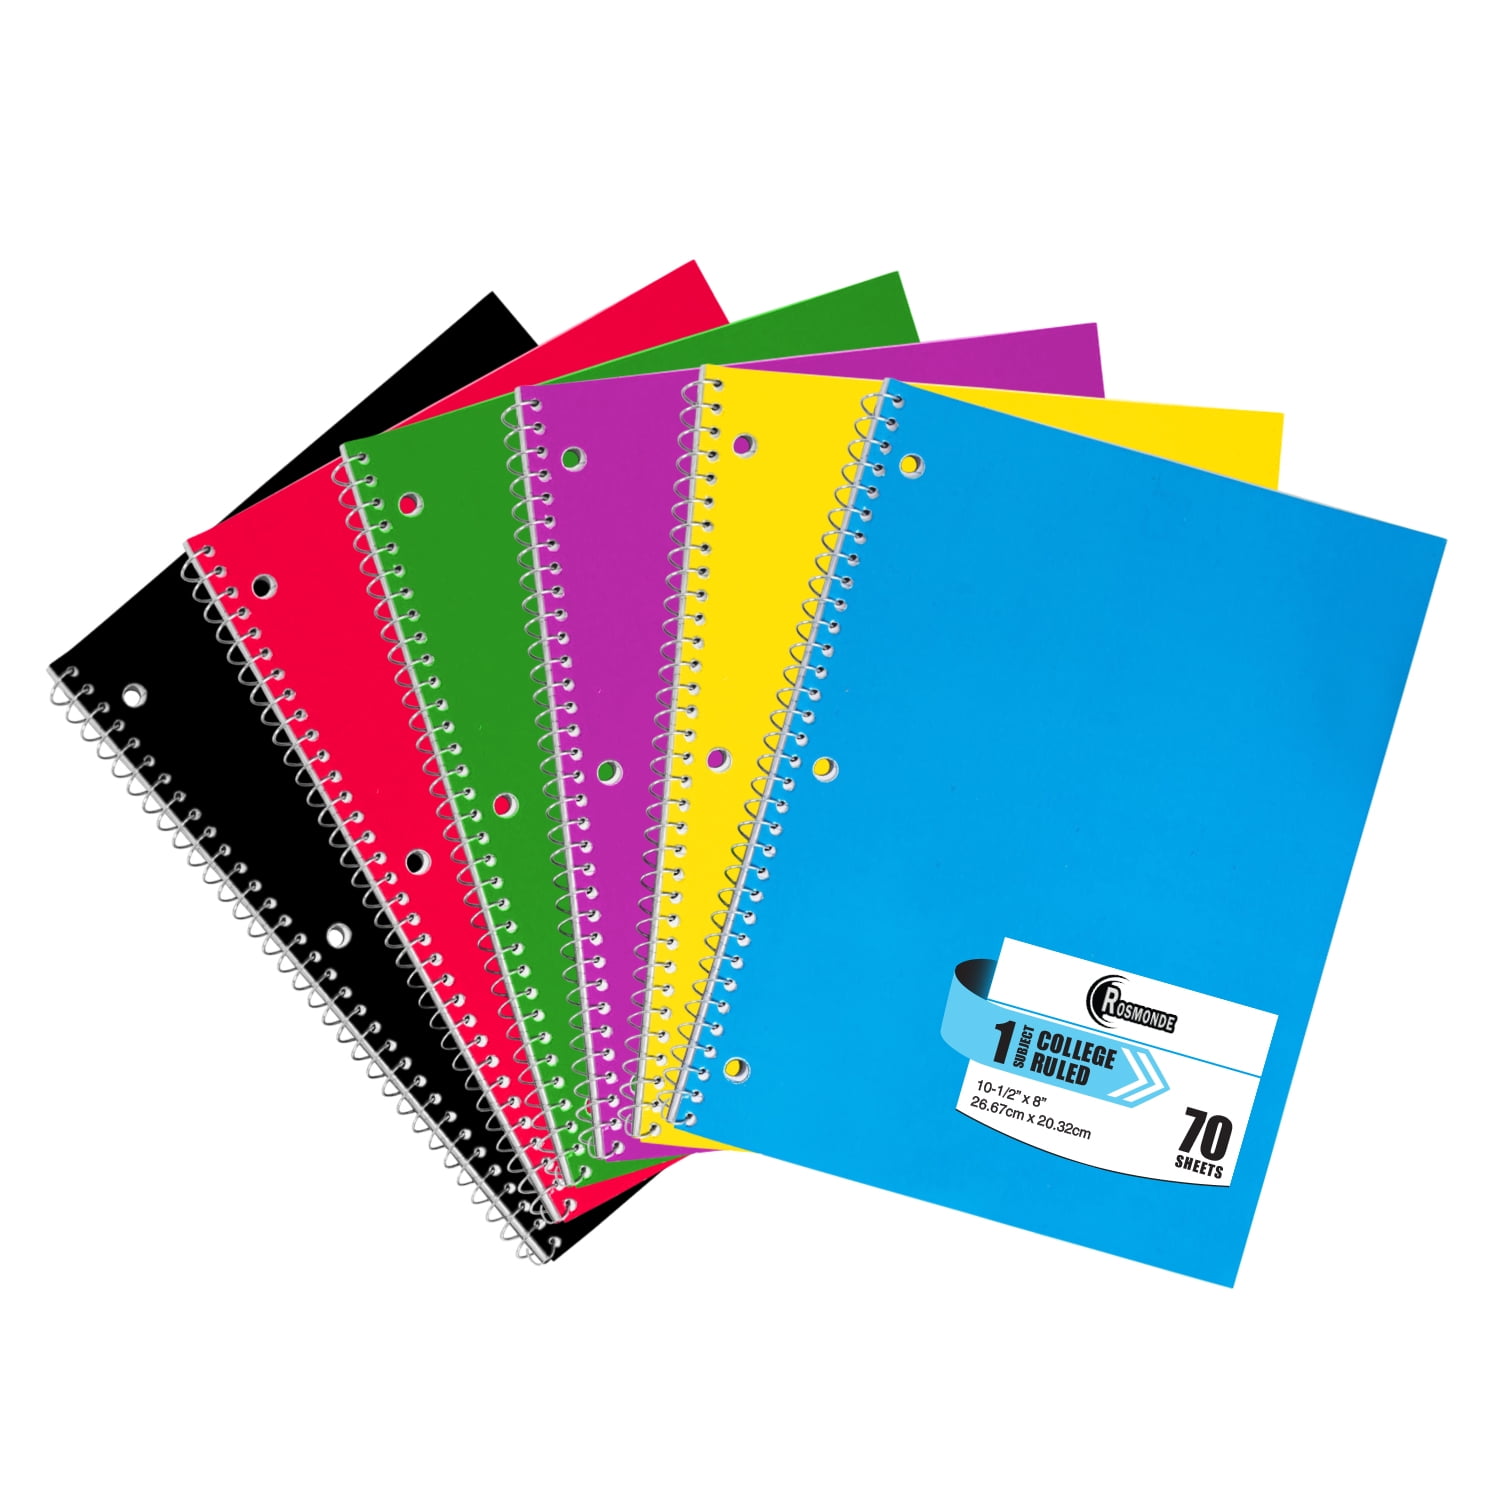 Five Star Wirebound Notebook, 2 Subjects, College Rule, Assorted Color  Covers, 9.5 x 6.5, 100 Sheets (06180)